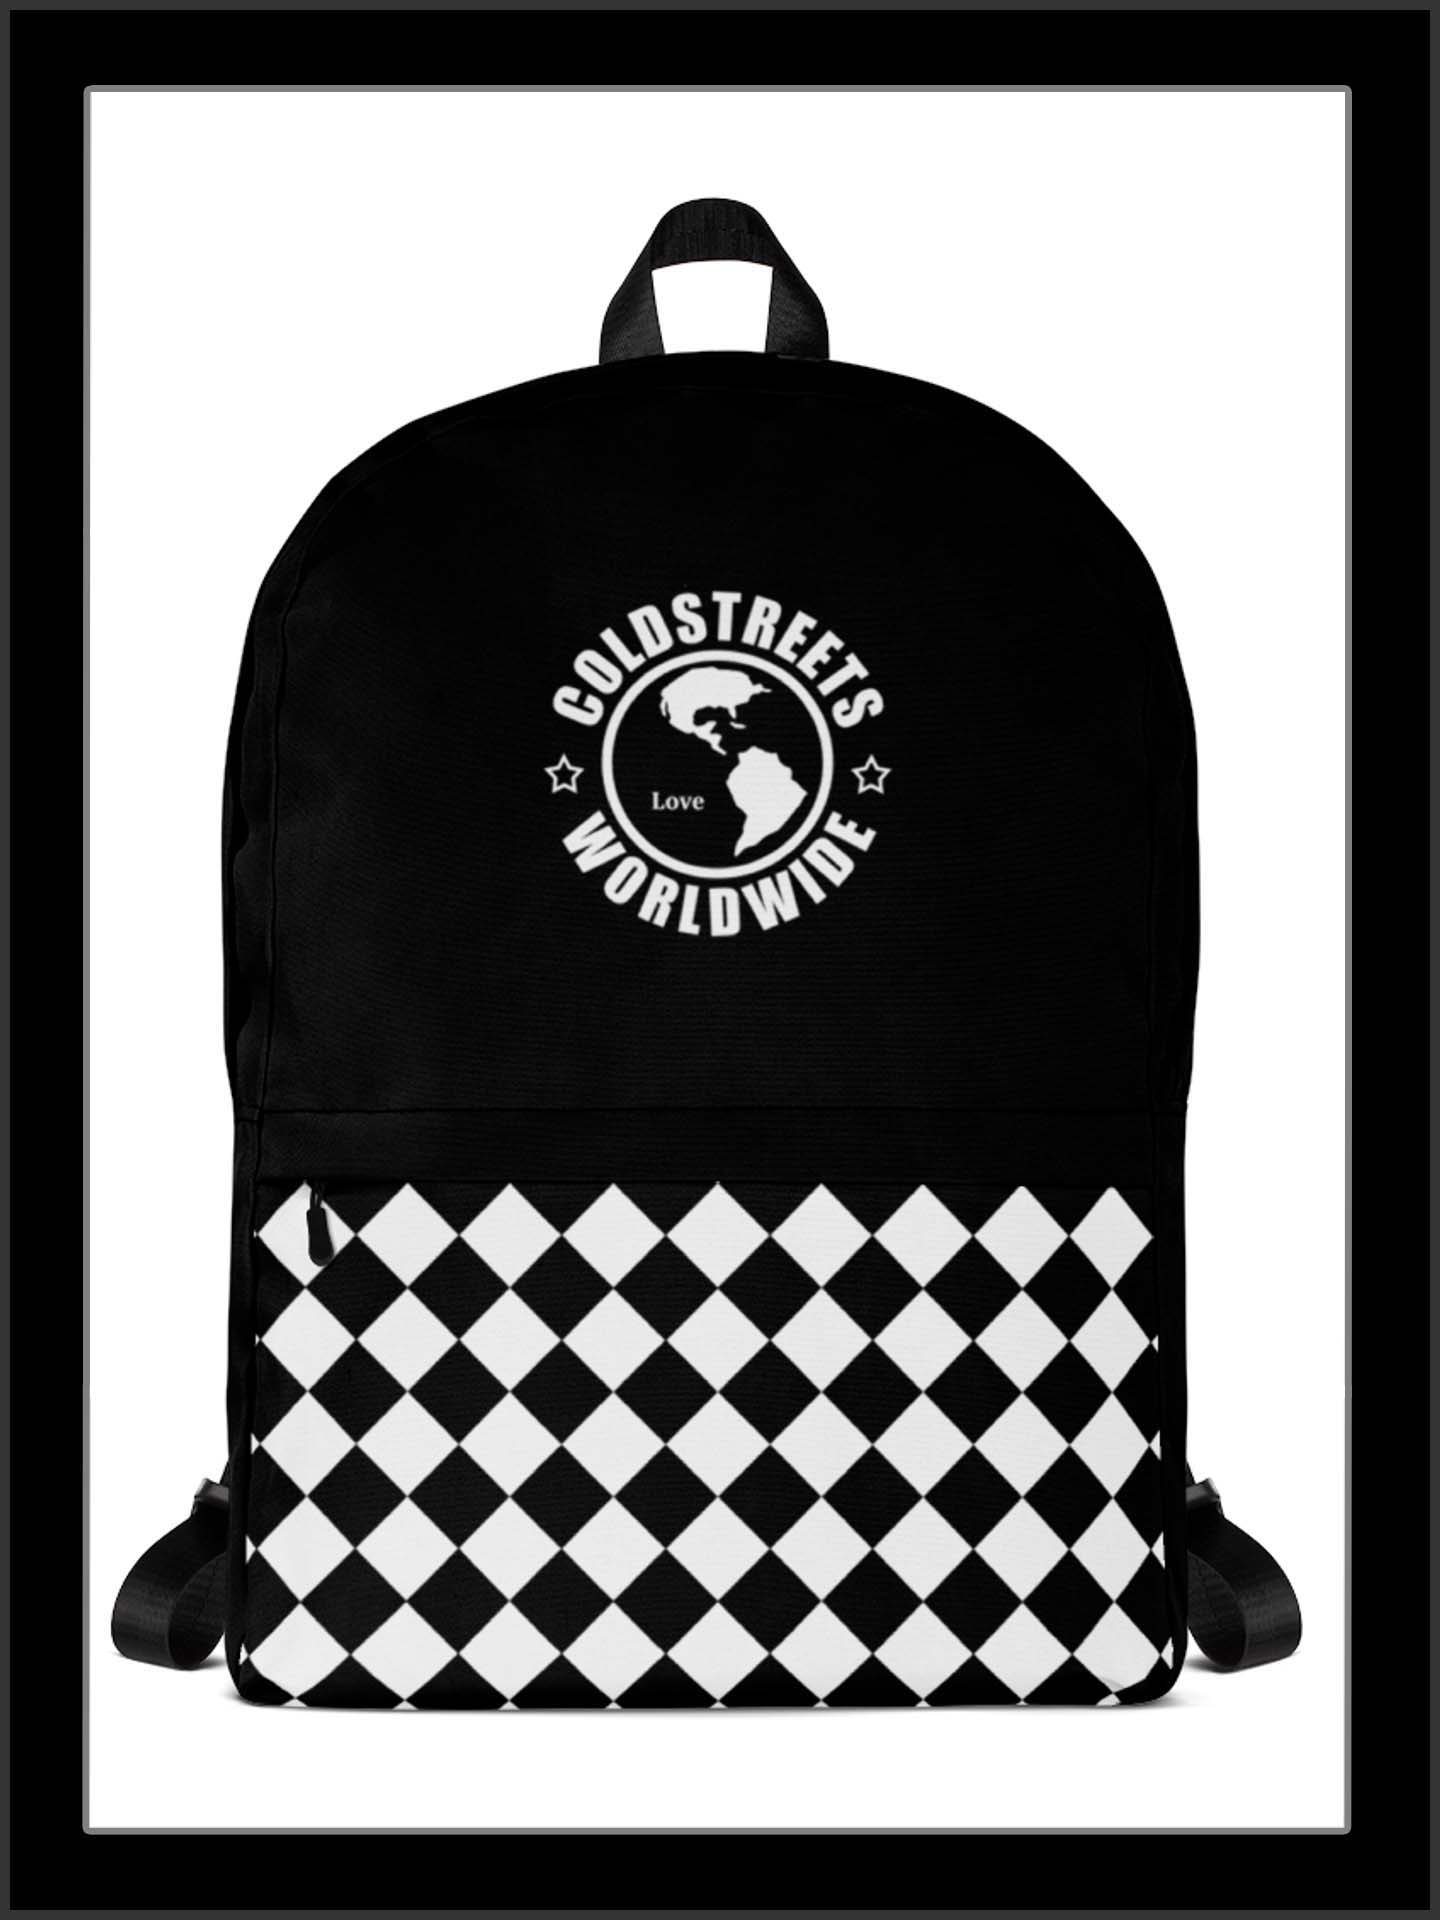 Cold Streets Colorado Backpacks